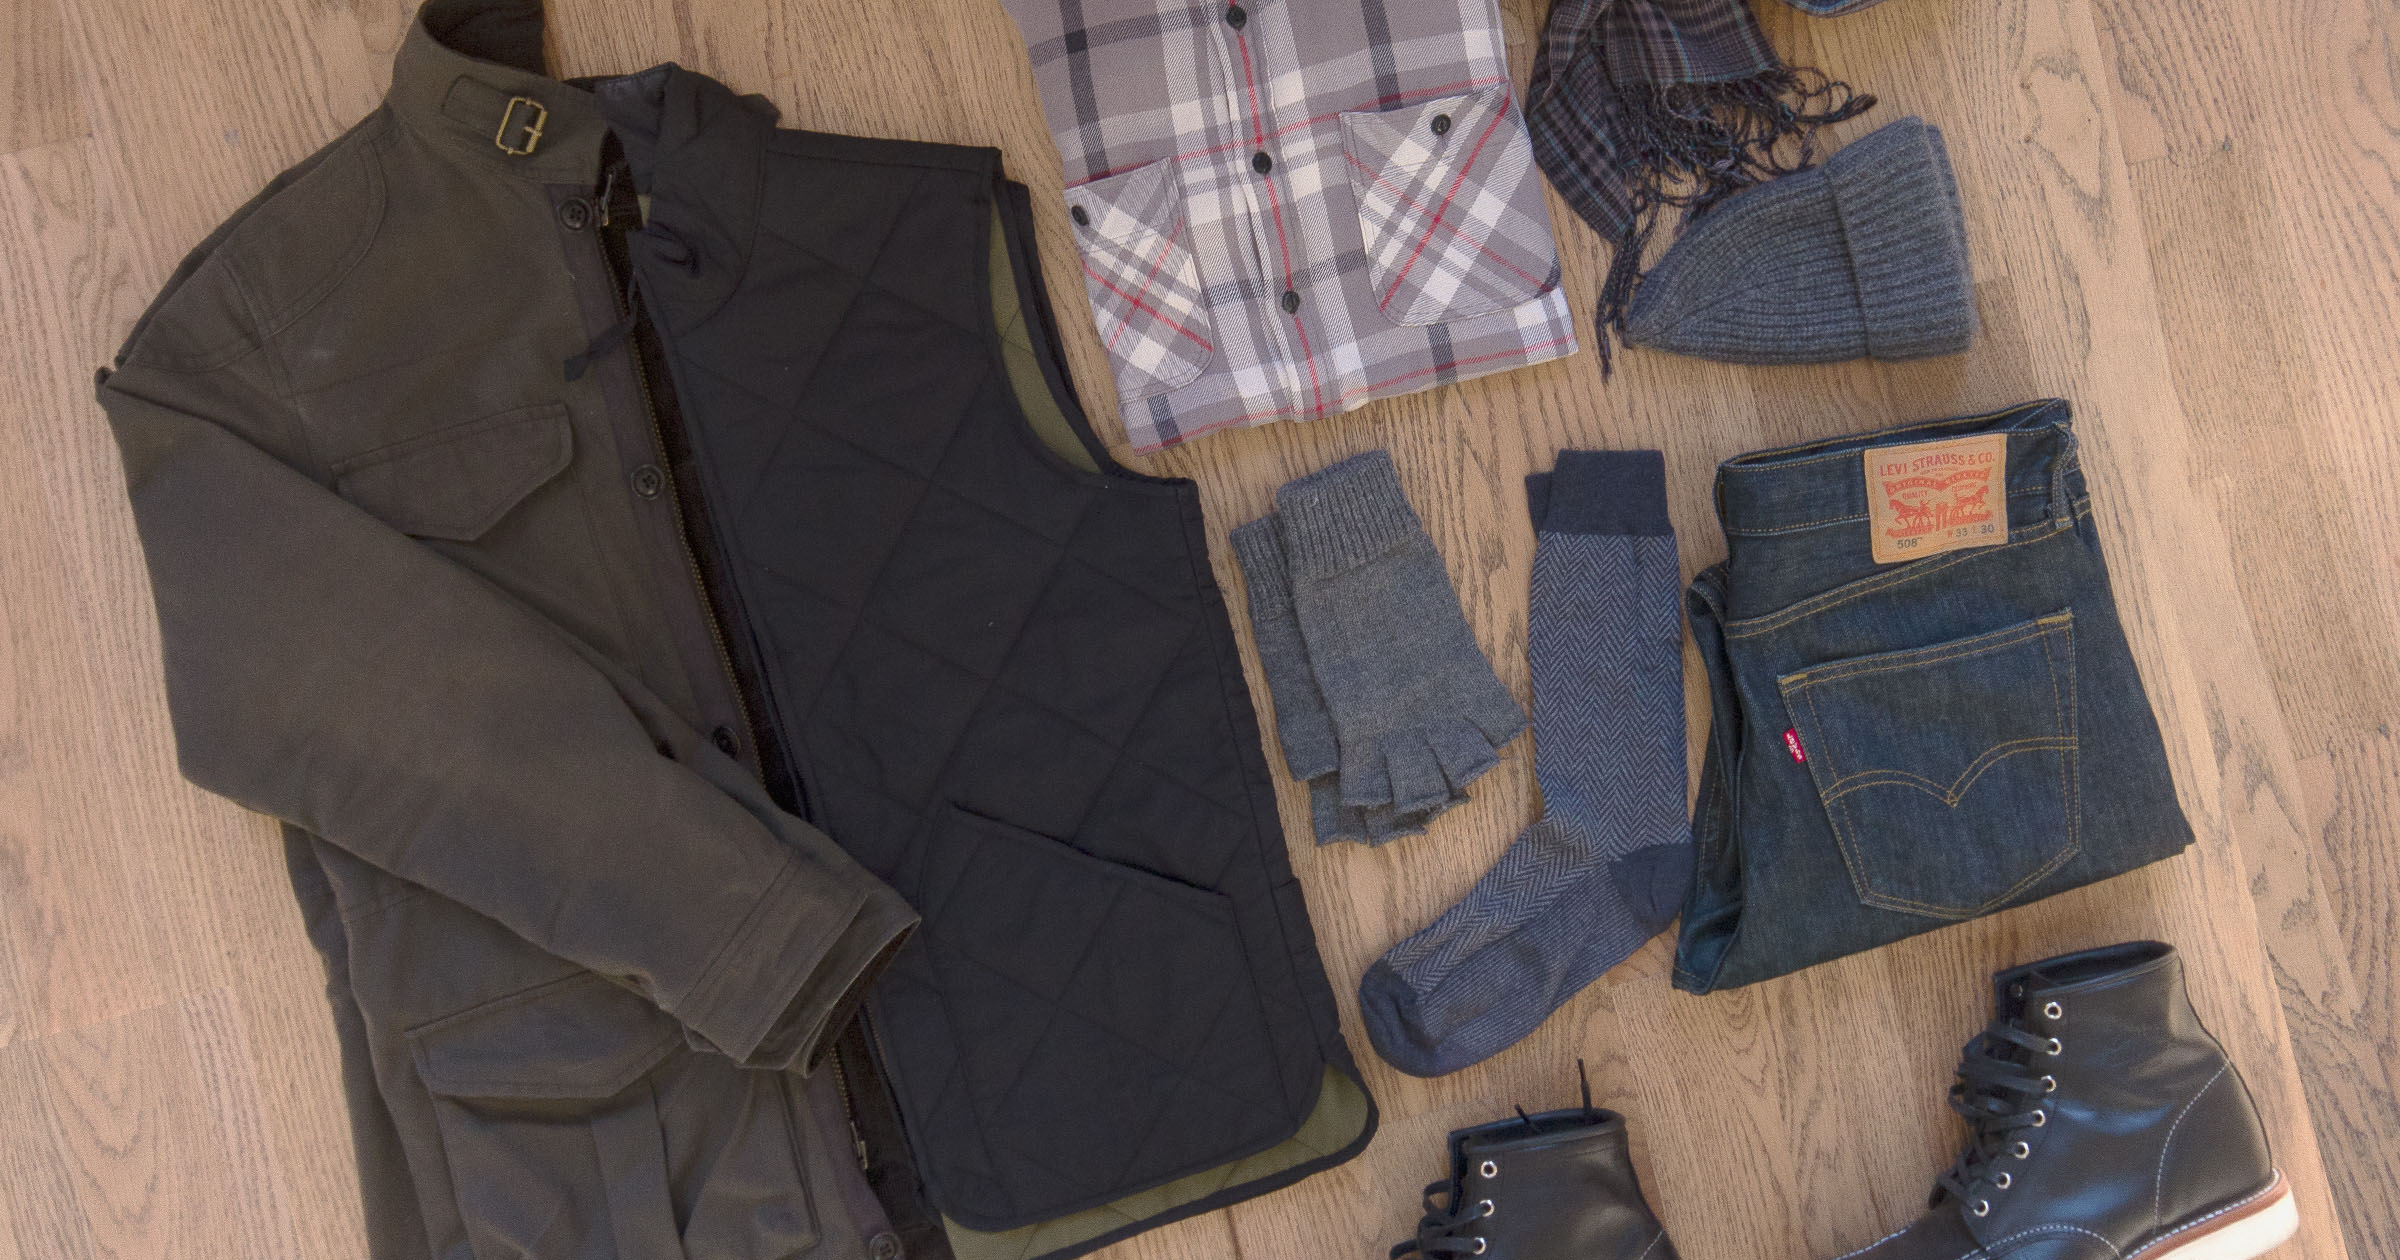 Assessing Your Lifestyle: Three Things To Consider Before Building Your Lean Wardrobe